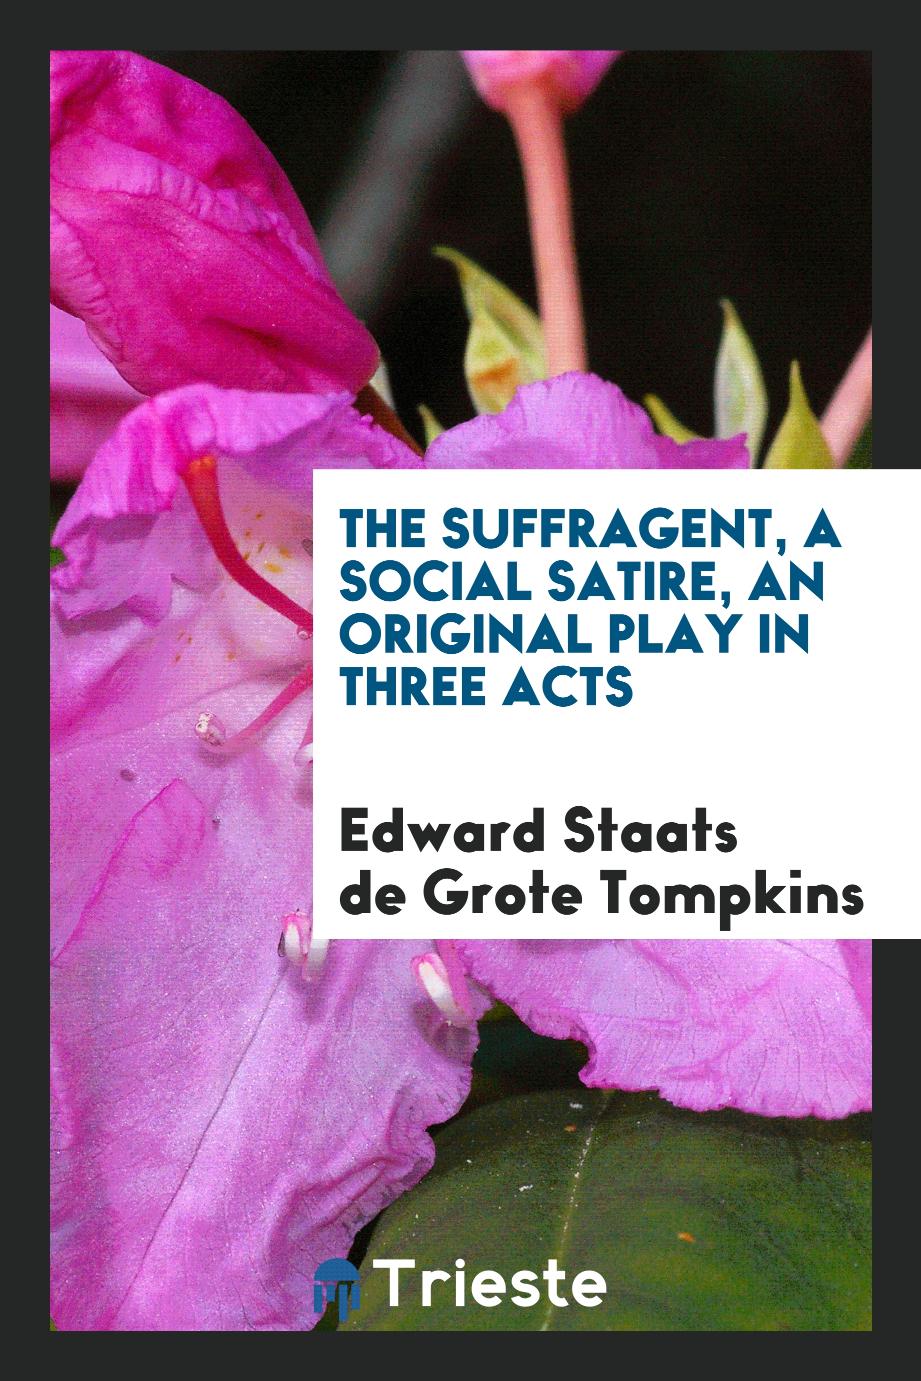 Edward Staats de Grote Tompkins - The Suffragent, a Social Satire, an Original Play in Three Acts